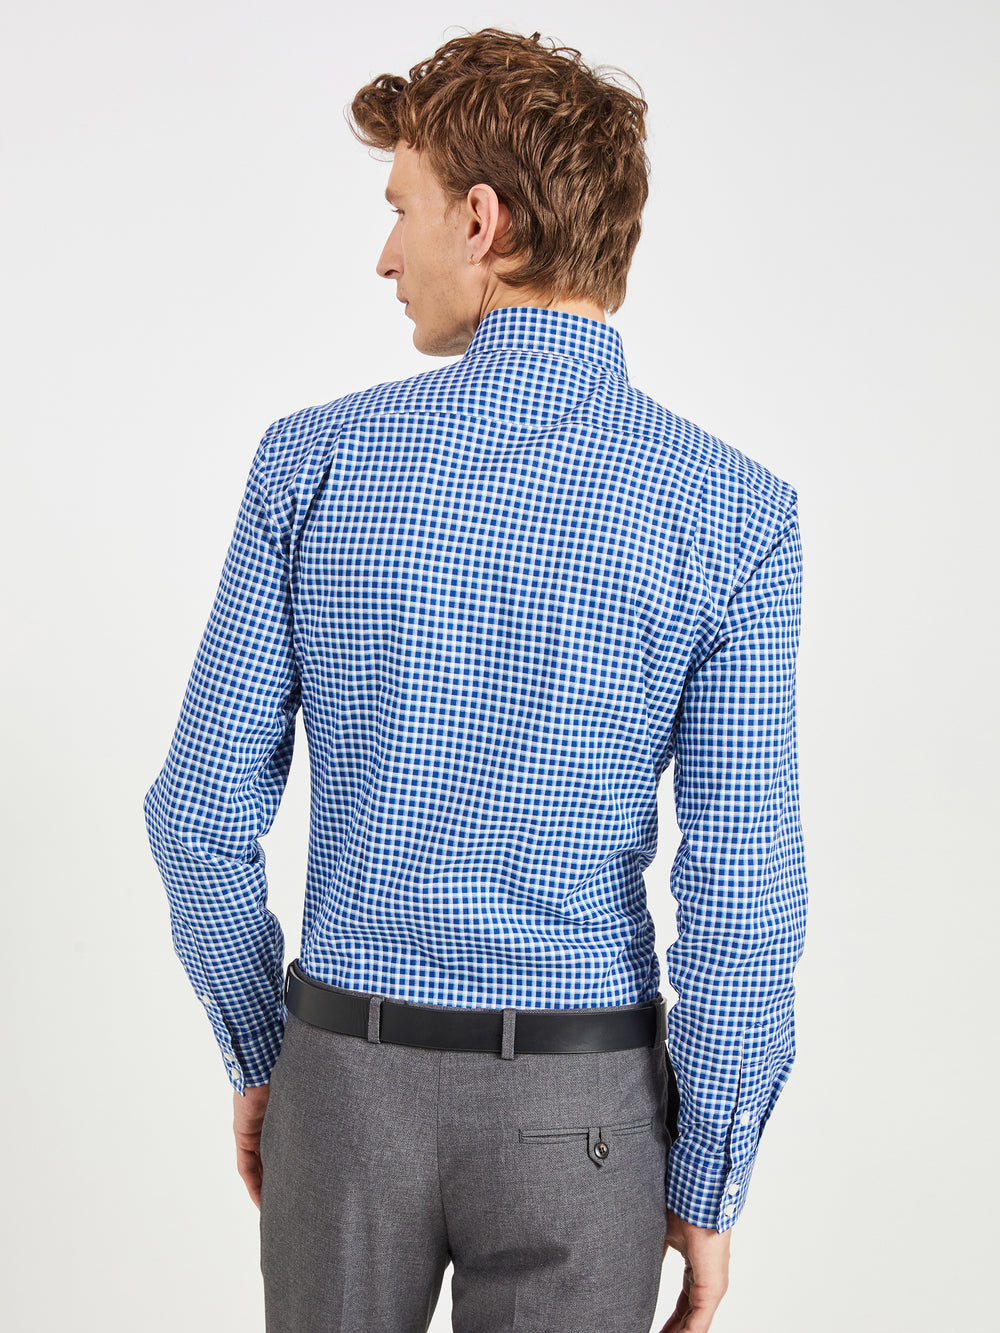 Pinpoint Check Slim Fit Dress Shirt - Teal/Blue